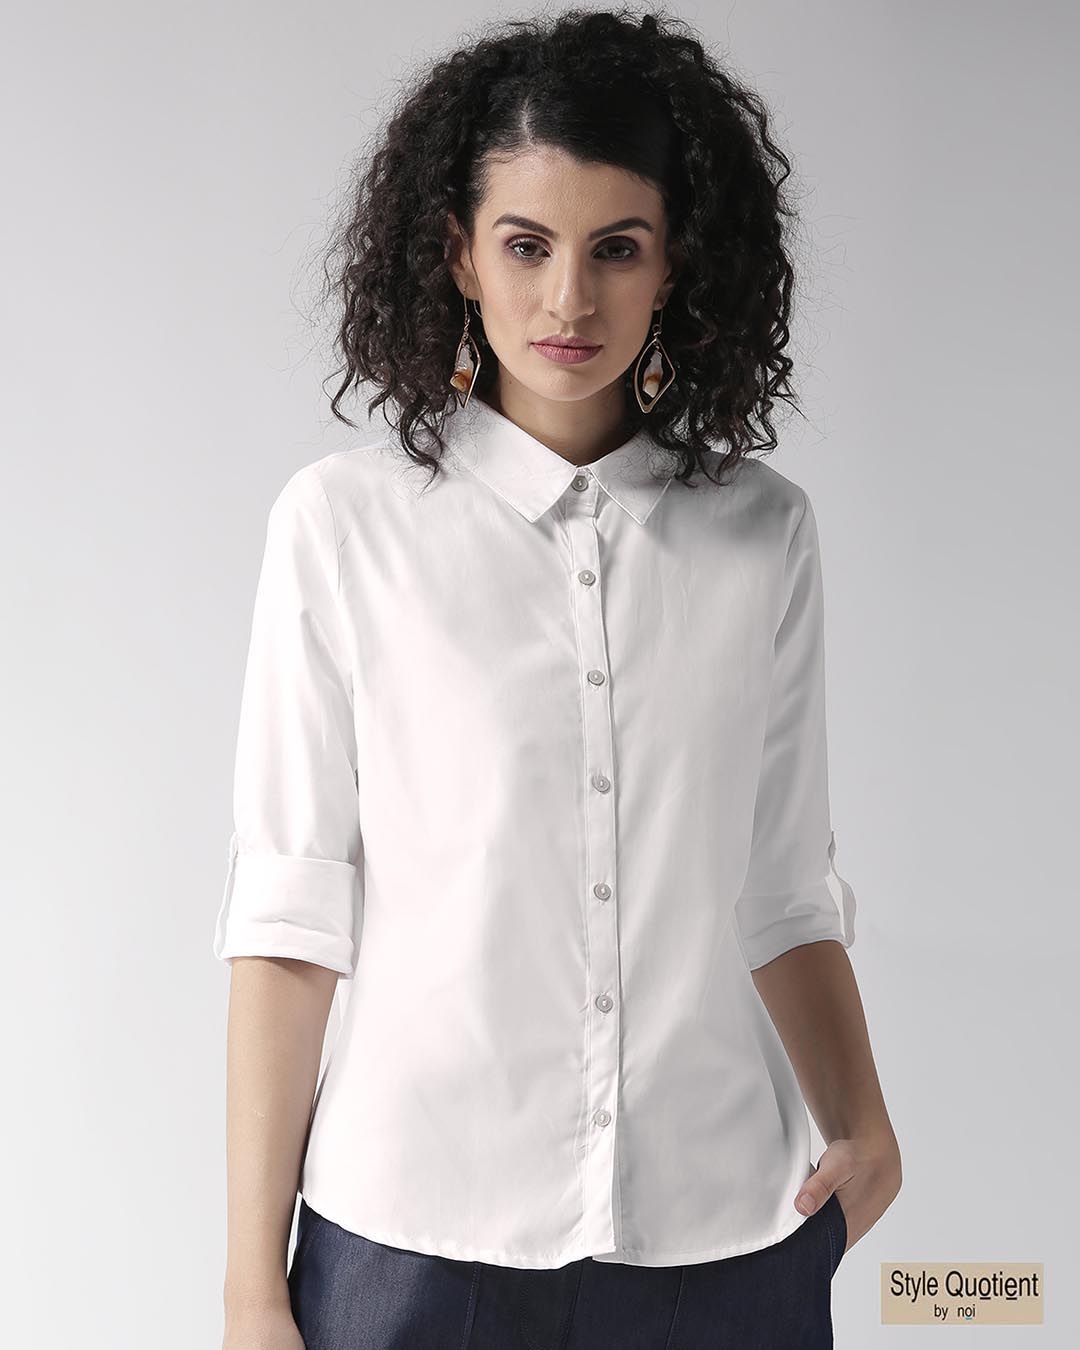 Buy Style Quotient Women White Regular Fit Solid Casual Shirt Online at ...